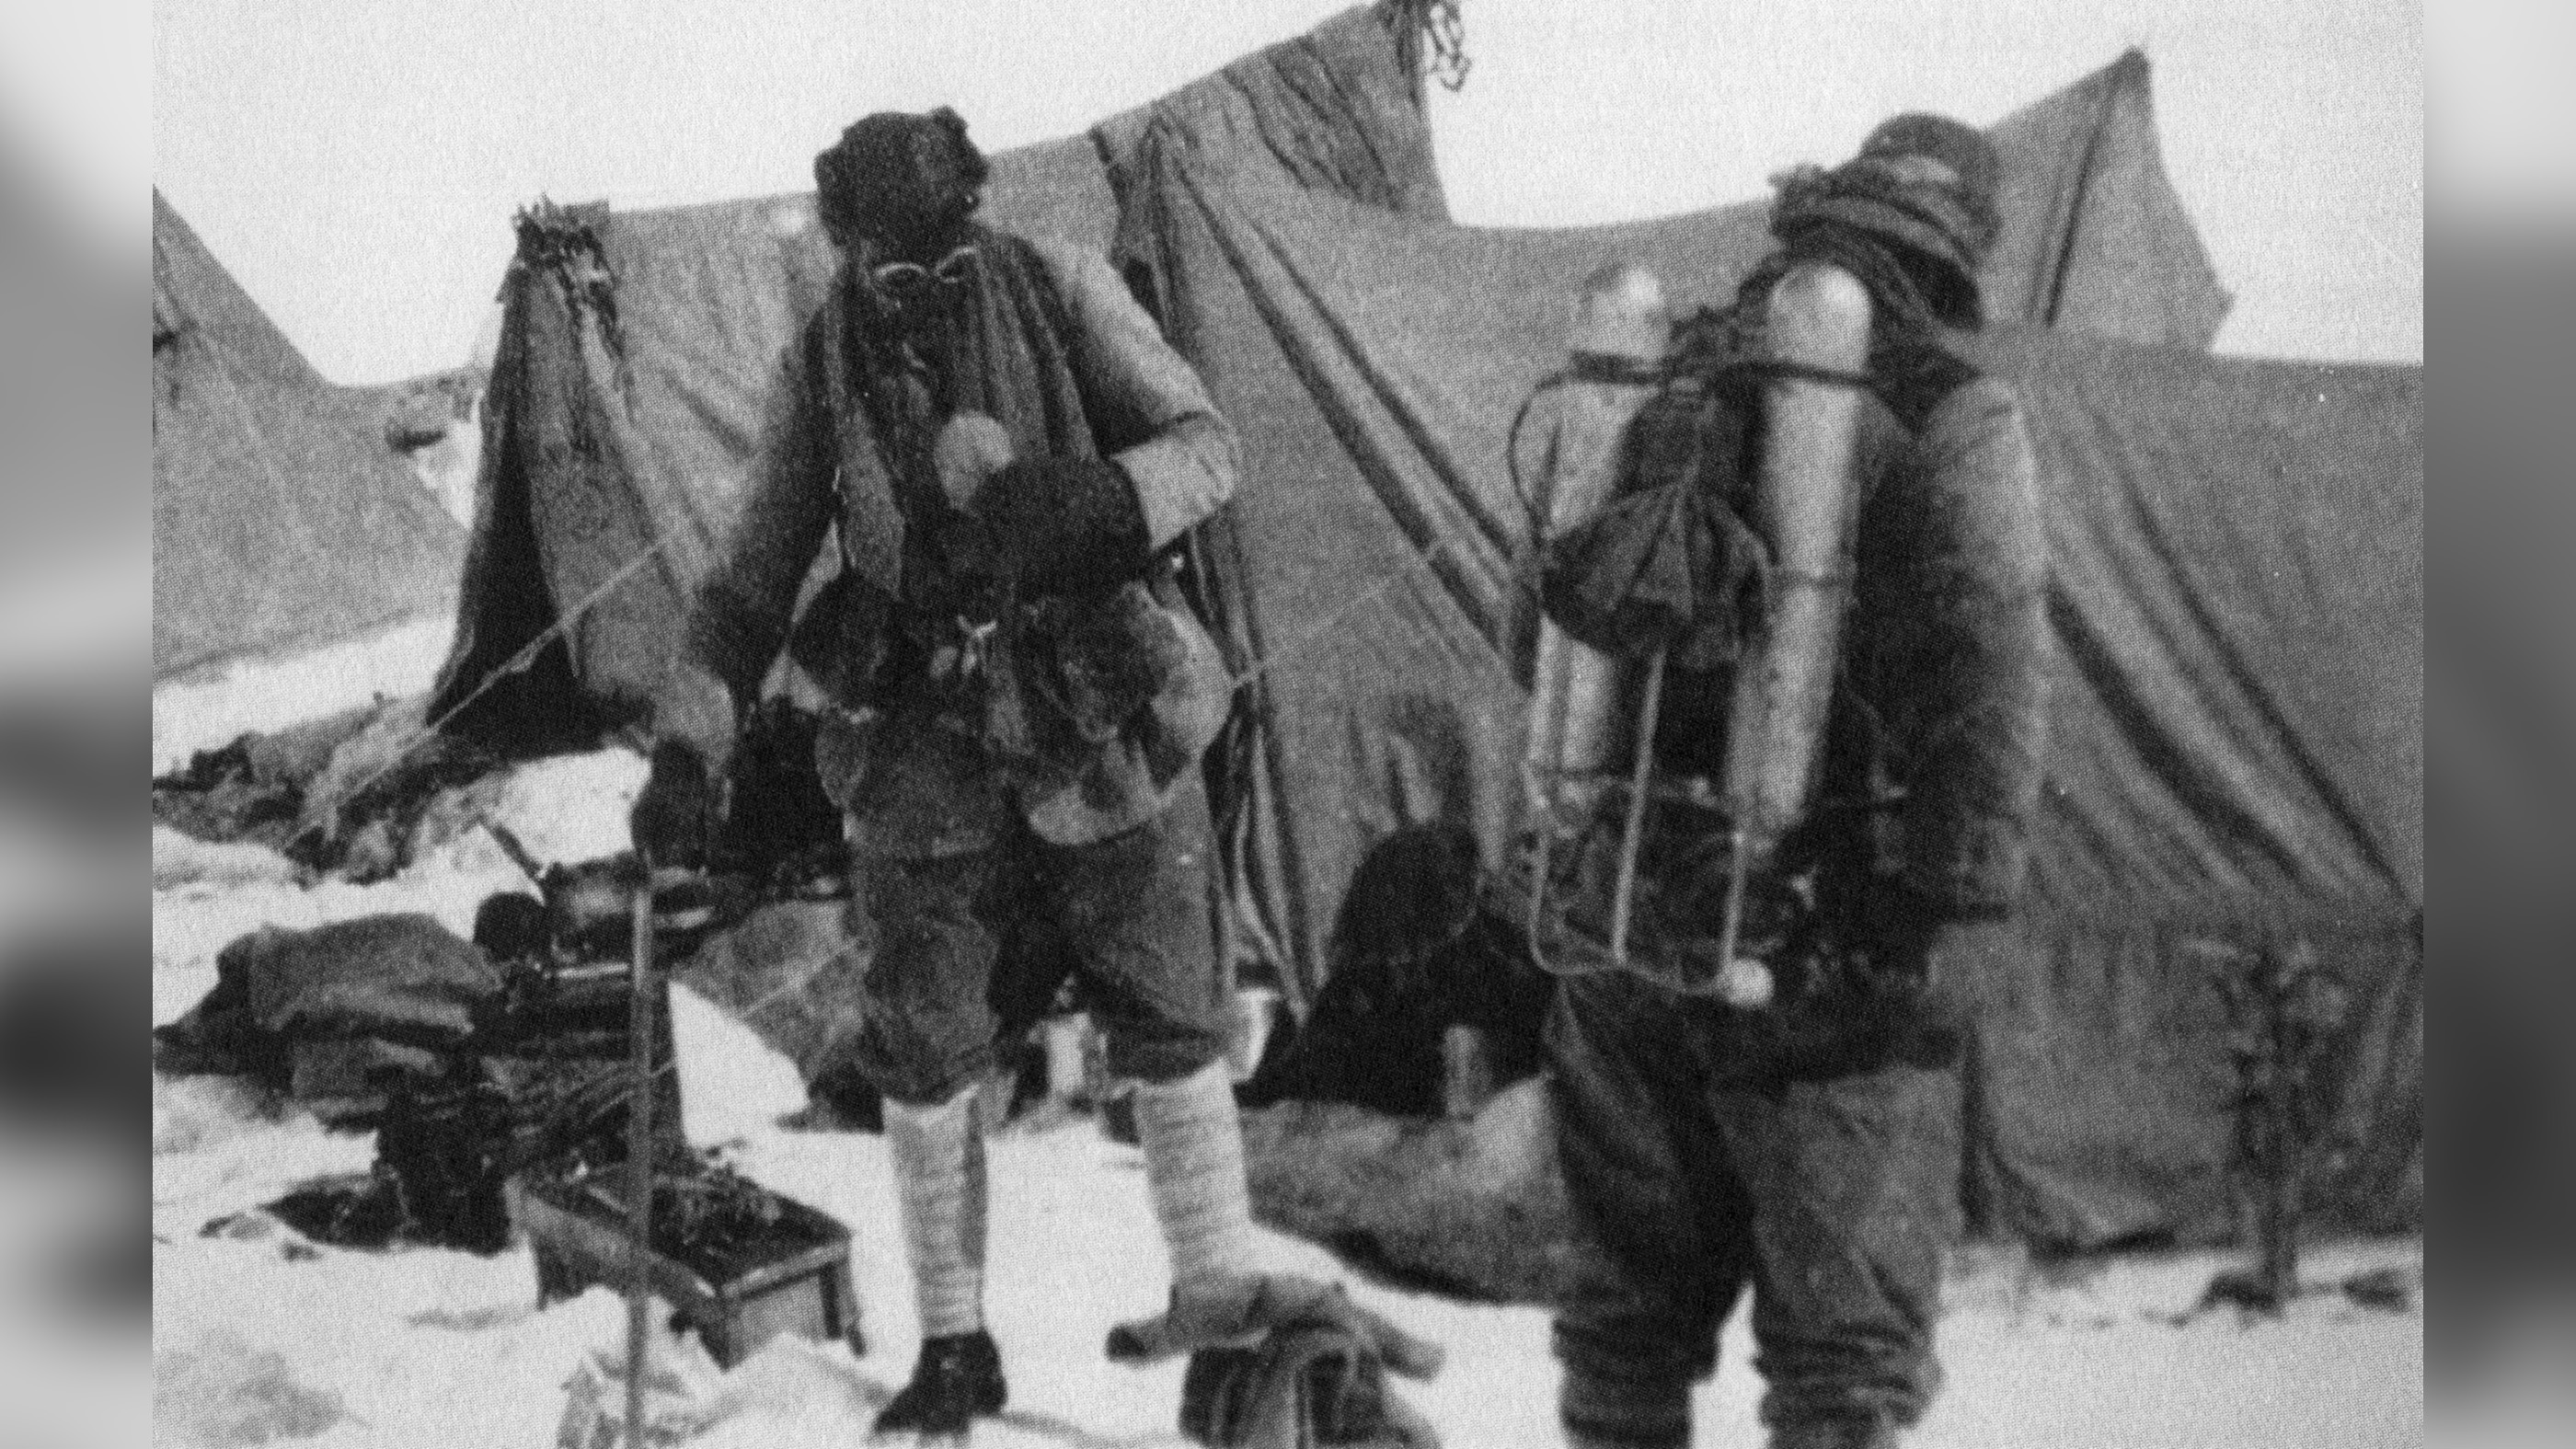 George Mallory (left) with Andrew Irvine in the last known photo of them on their fatal Everest climb in June 1924.